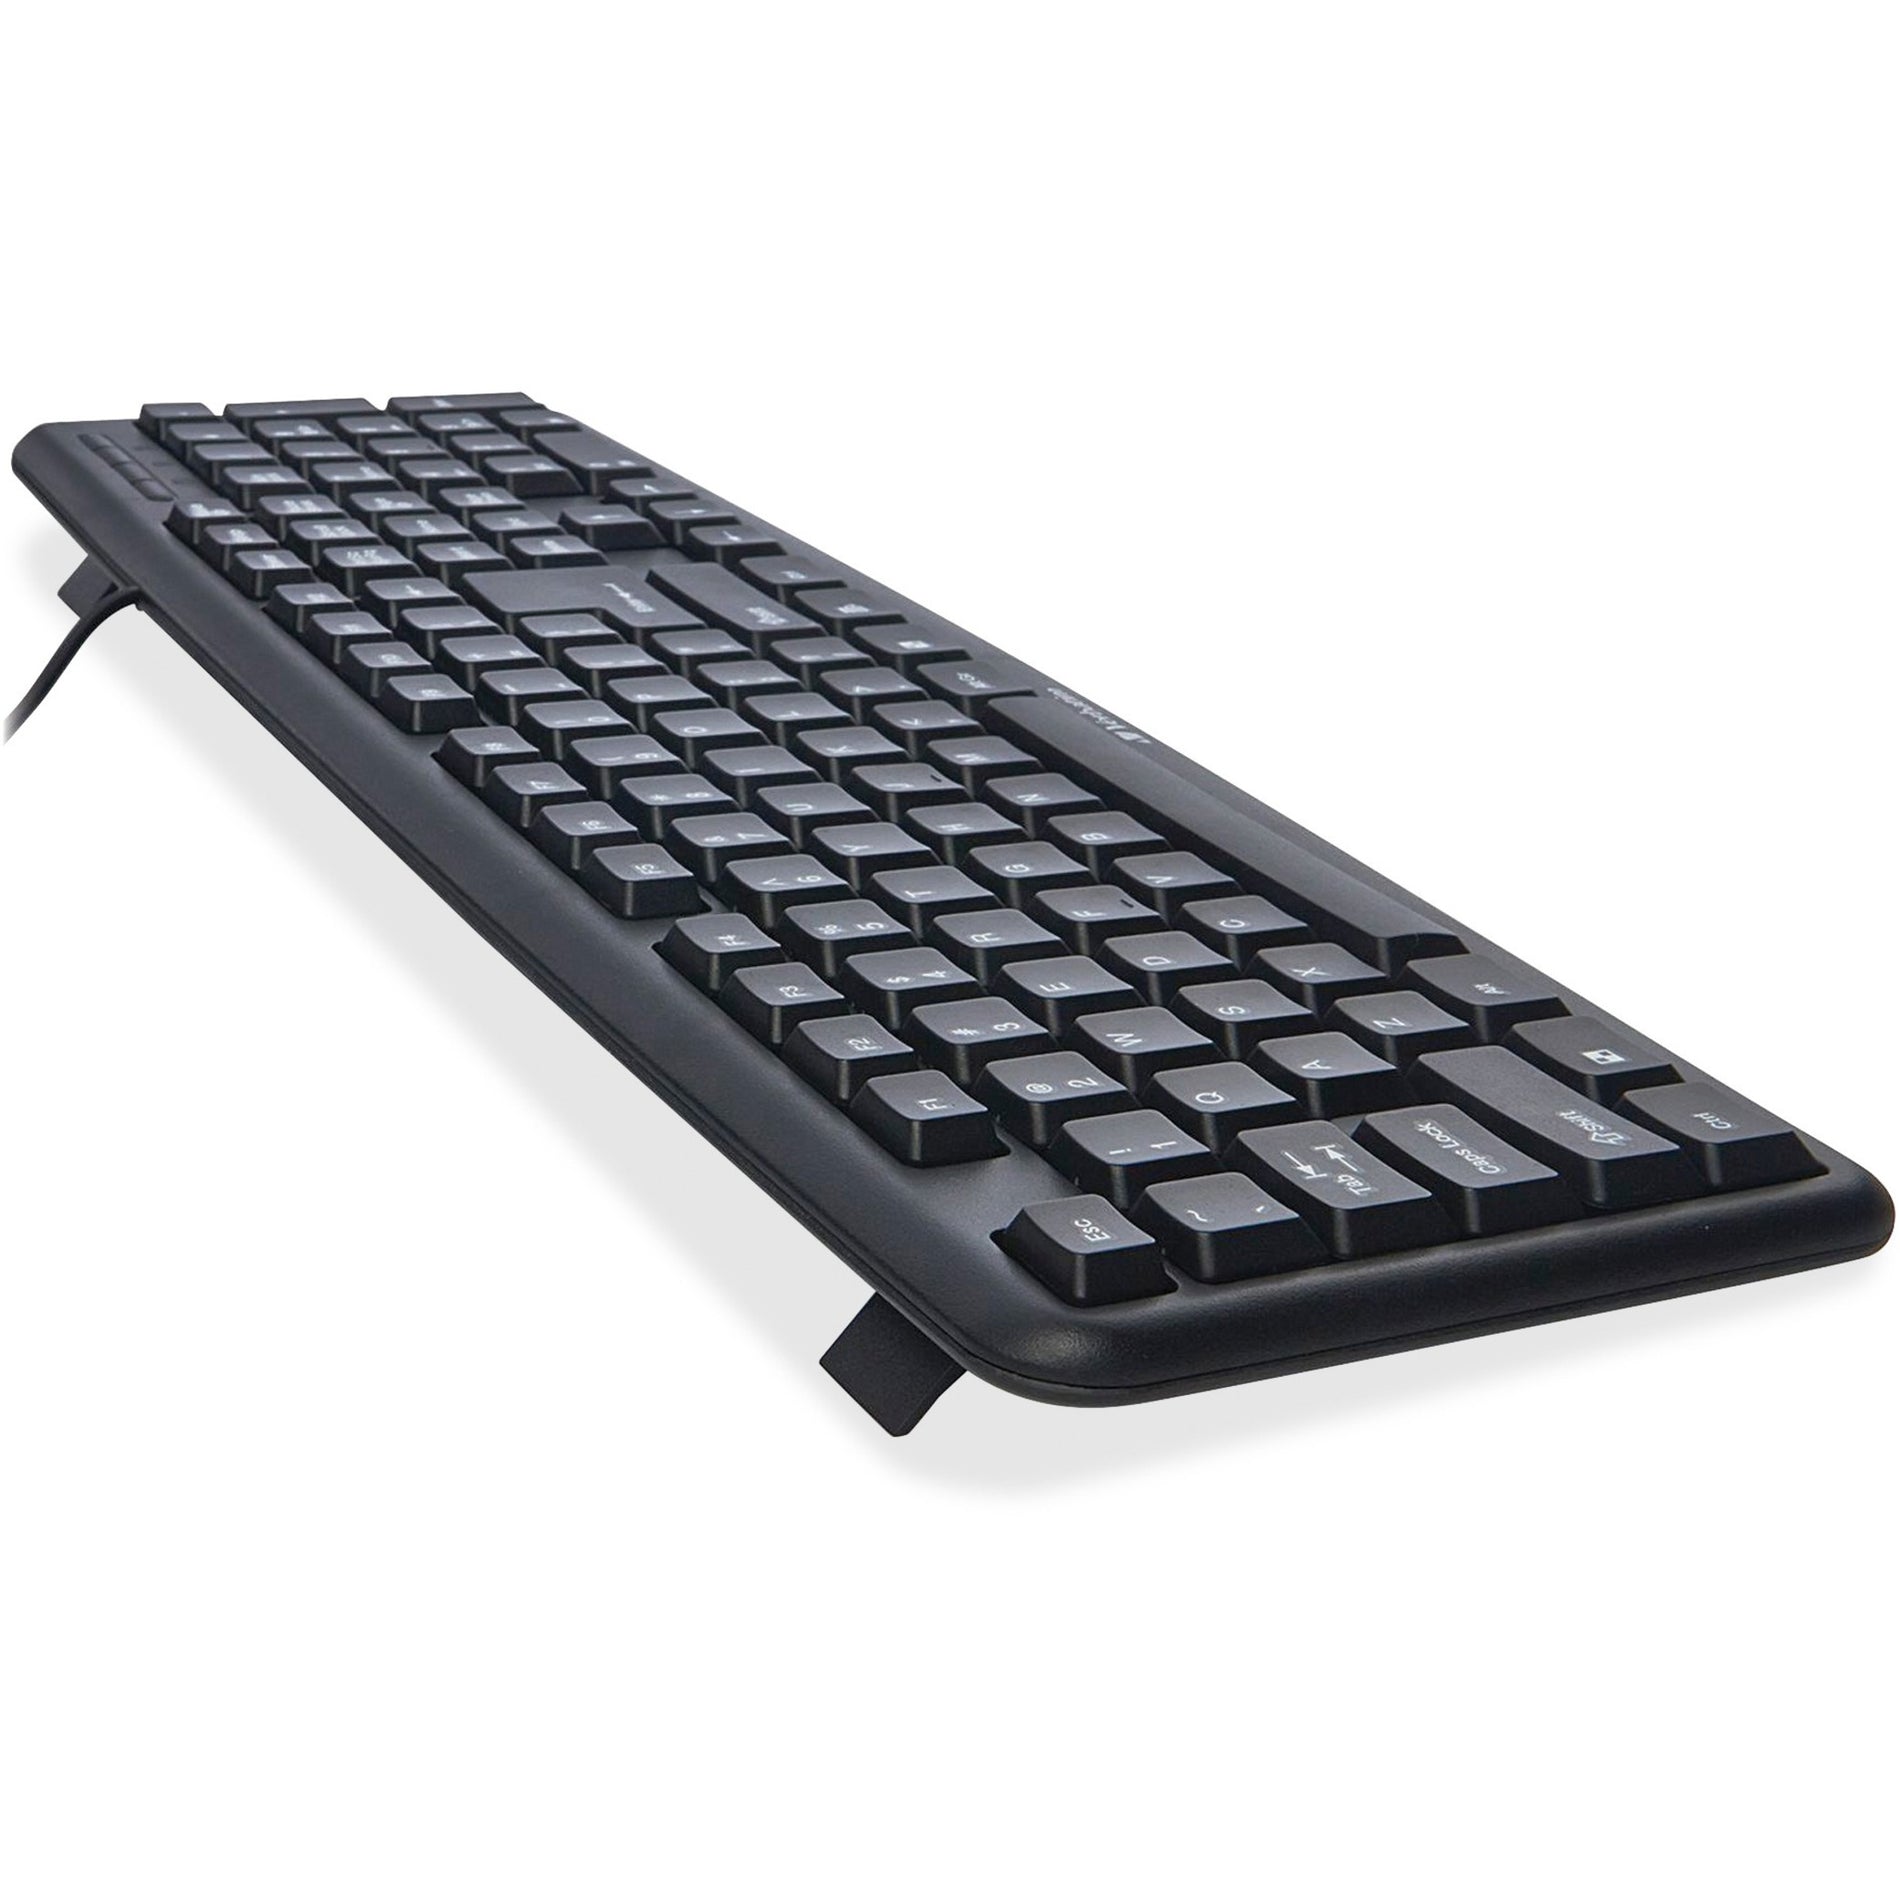 Verbatim 99202 Slimline Corded USB Keyboard and Mouse-Black, QWERTY Layout, Scroll Wheel, 3 Buttons